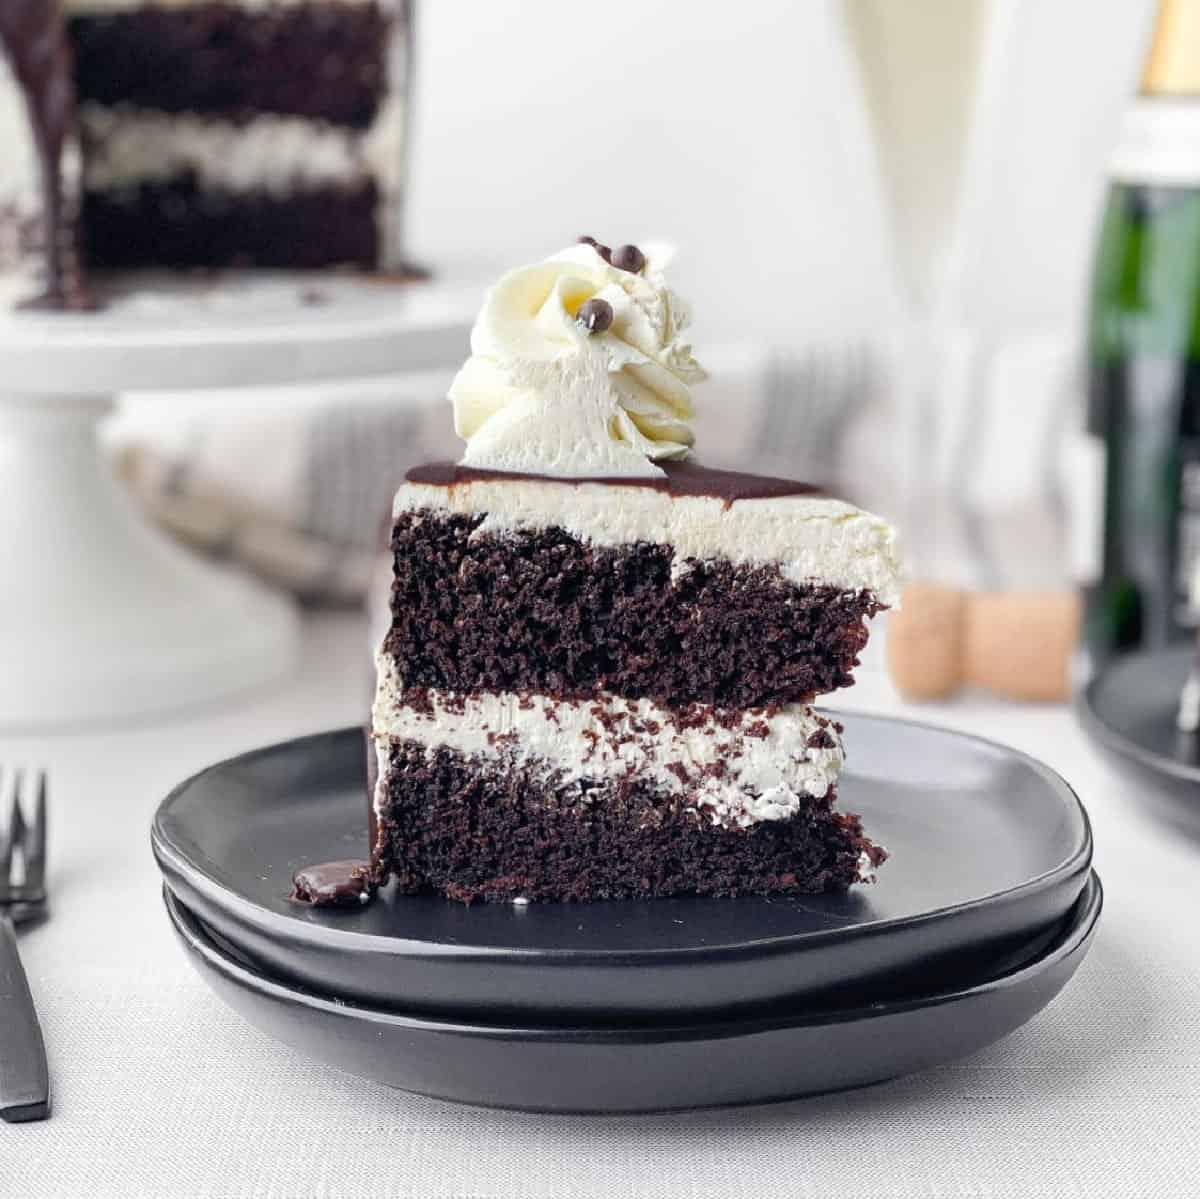 Slice of Chocolate Champagne Cake on a black plate.